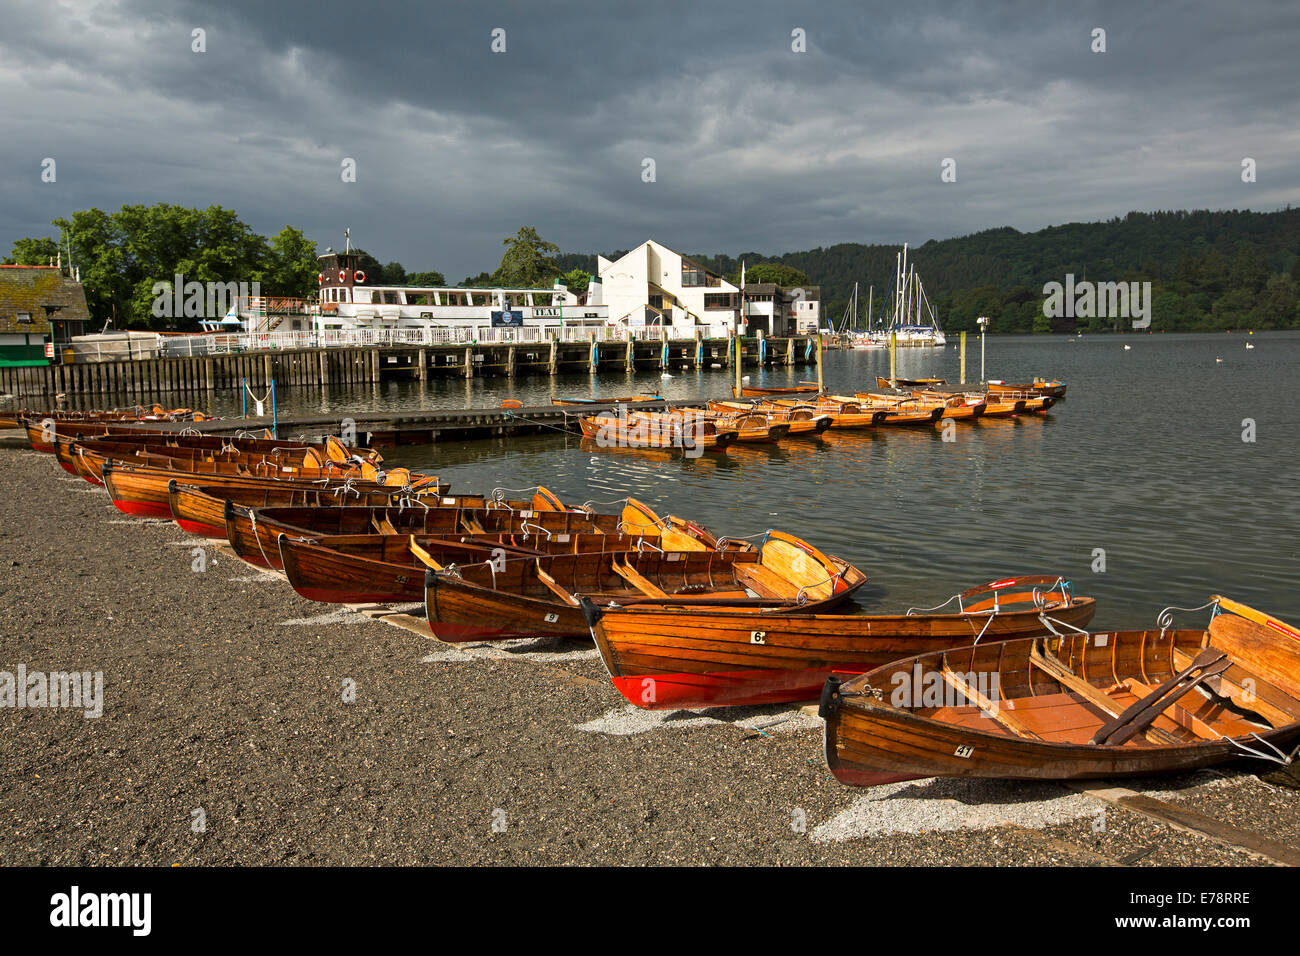 Row of colourful wooden rowing boats on bank of Lake Windemere under stormy sky in Cumbria England Stock Photo